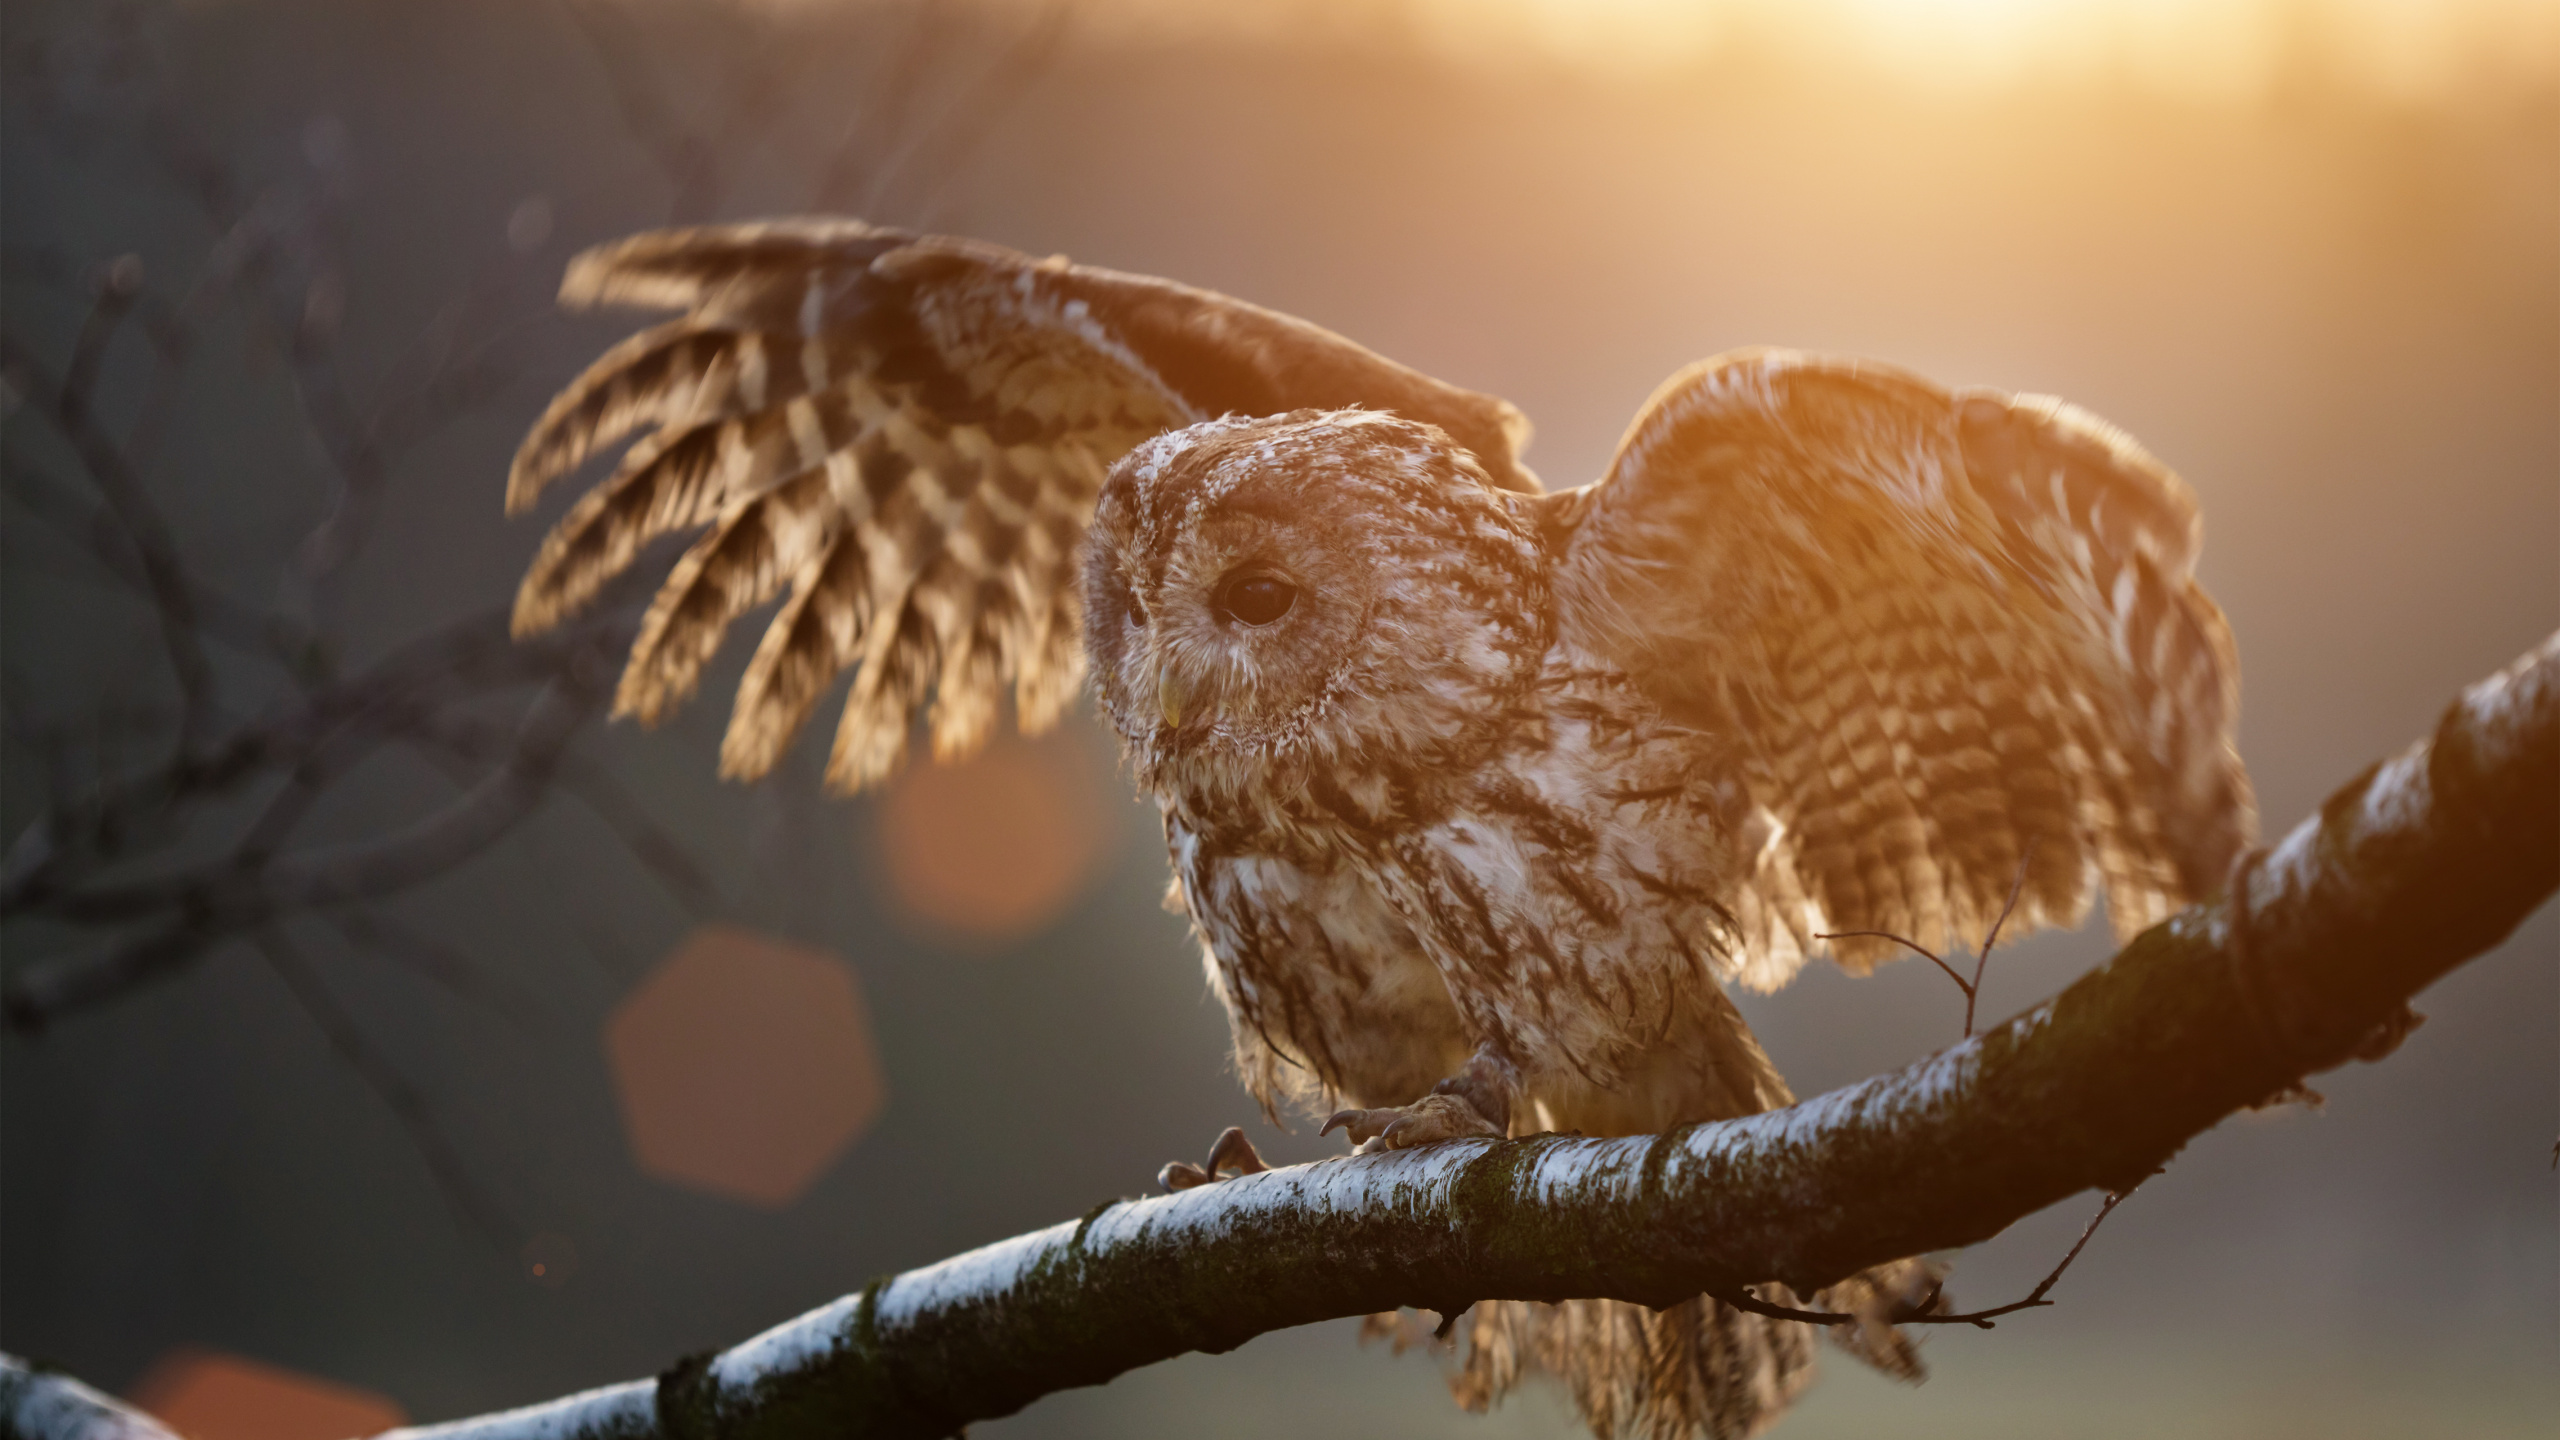 Brown Owl Perched on Brown Tree Branch During Daytime. Wallpaper in 2560x1440 Resolution